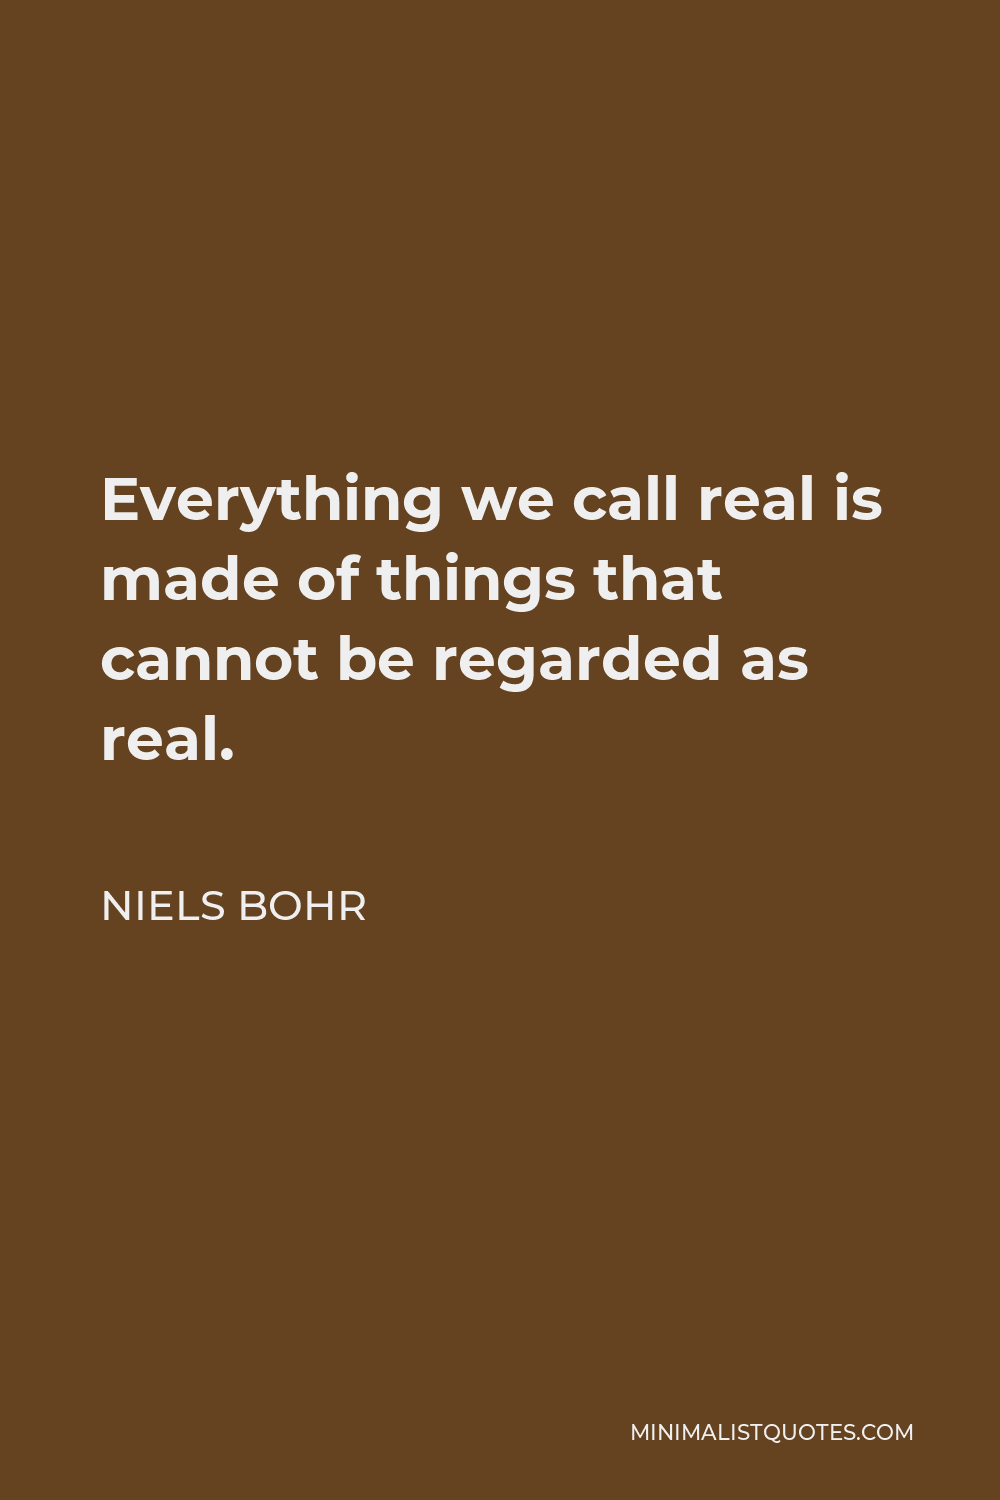 Niels Bohr Quote - Everything we call real is made of things that cannot be regarded as real.